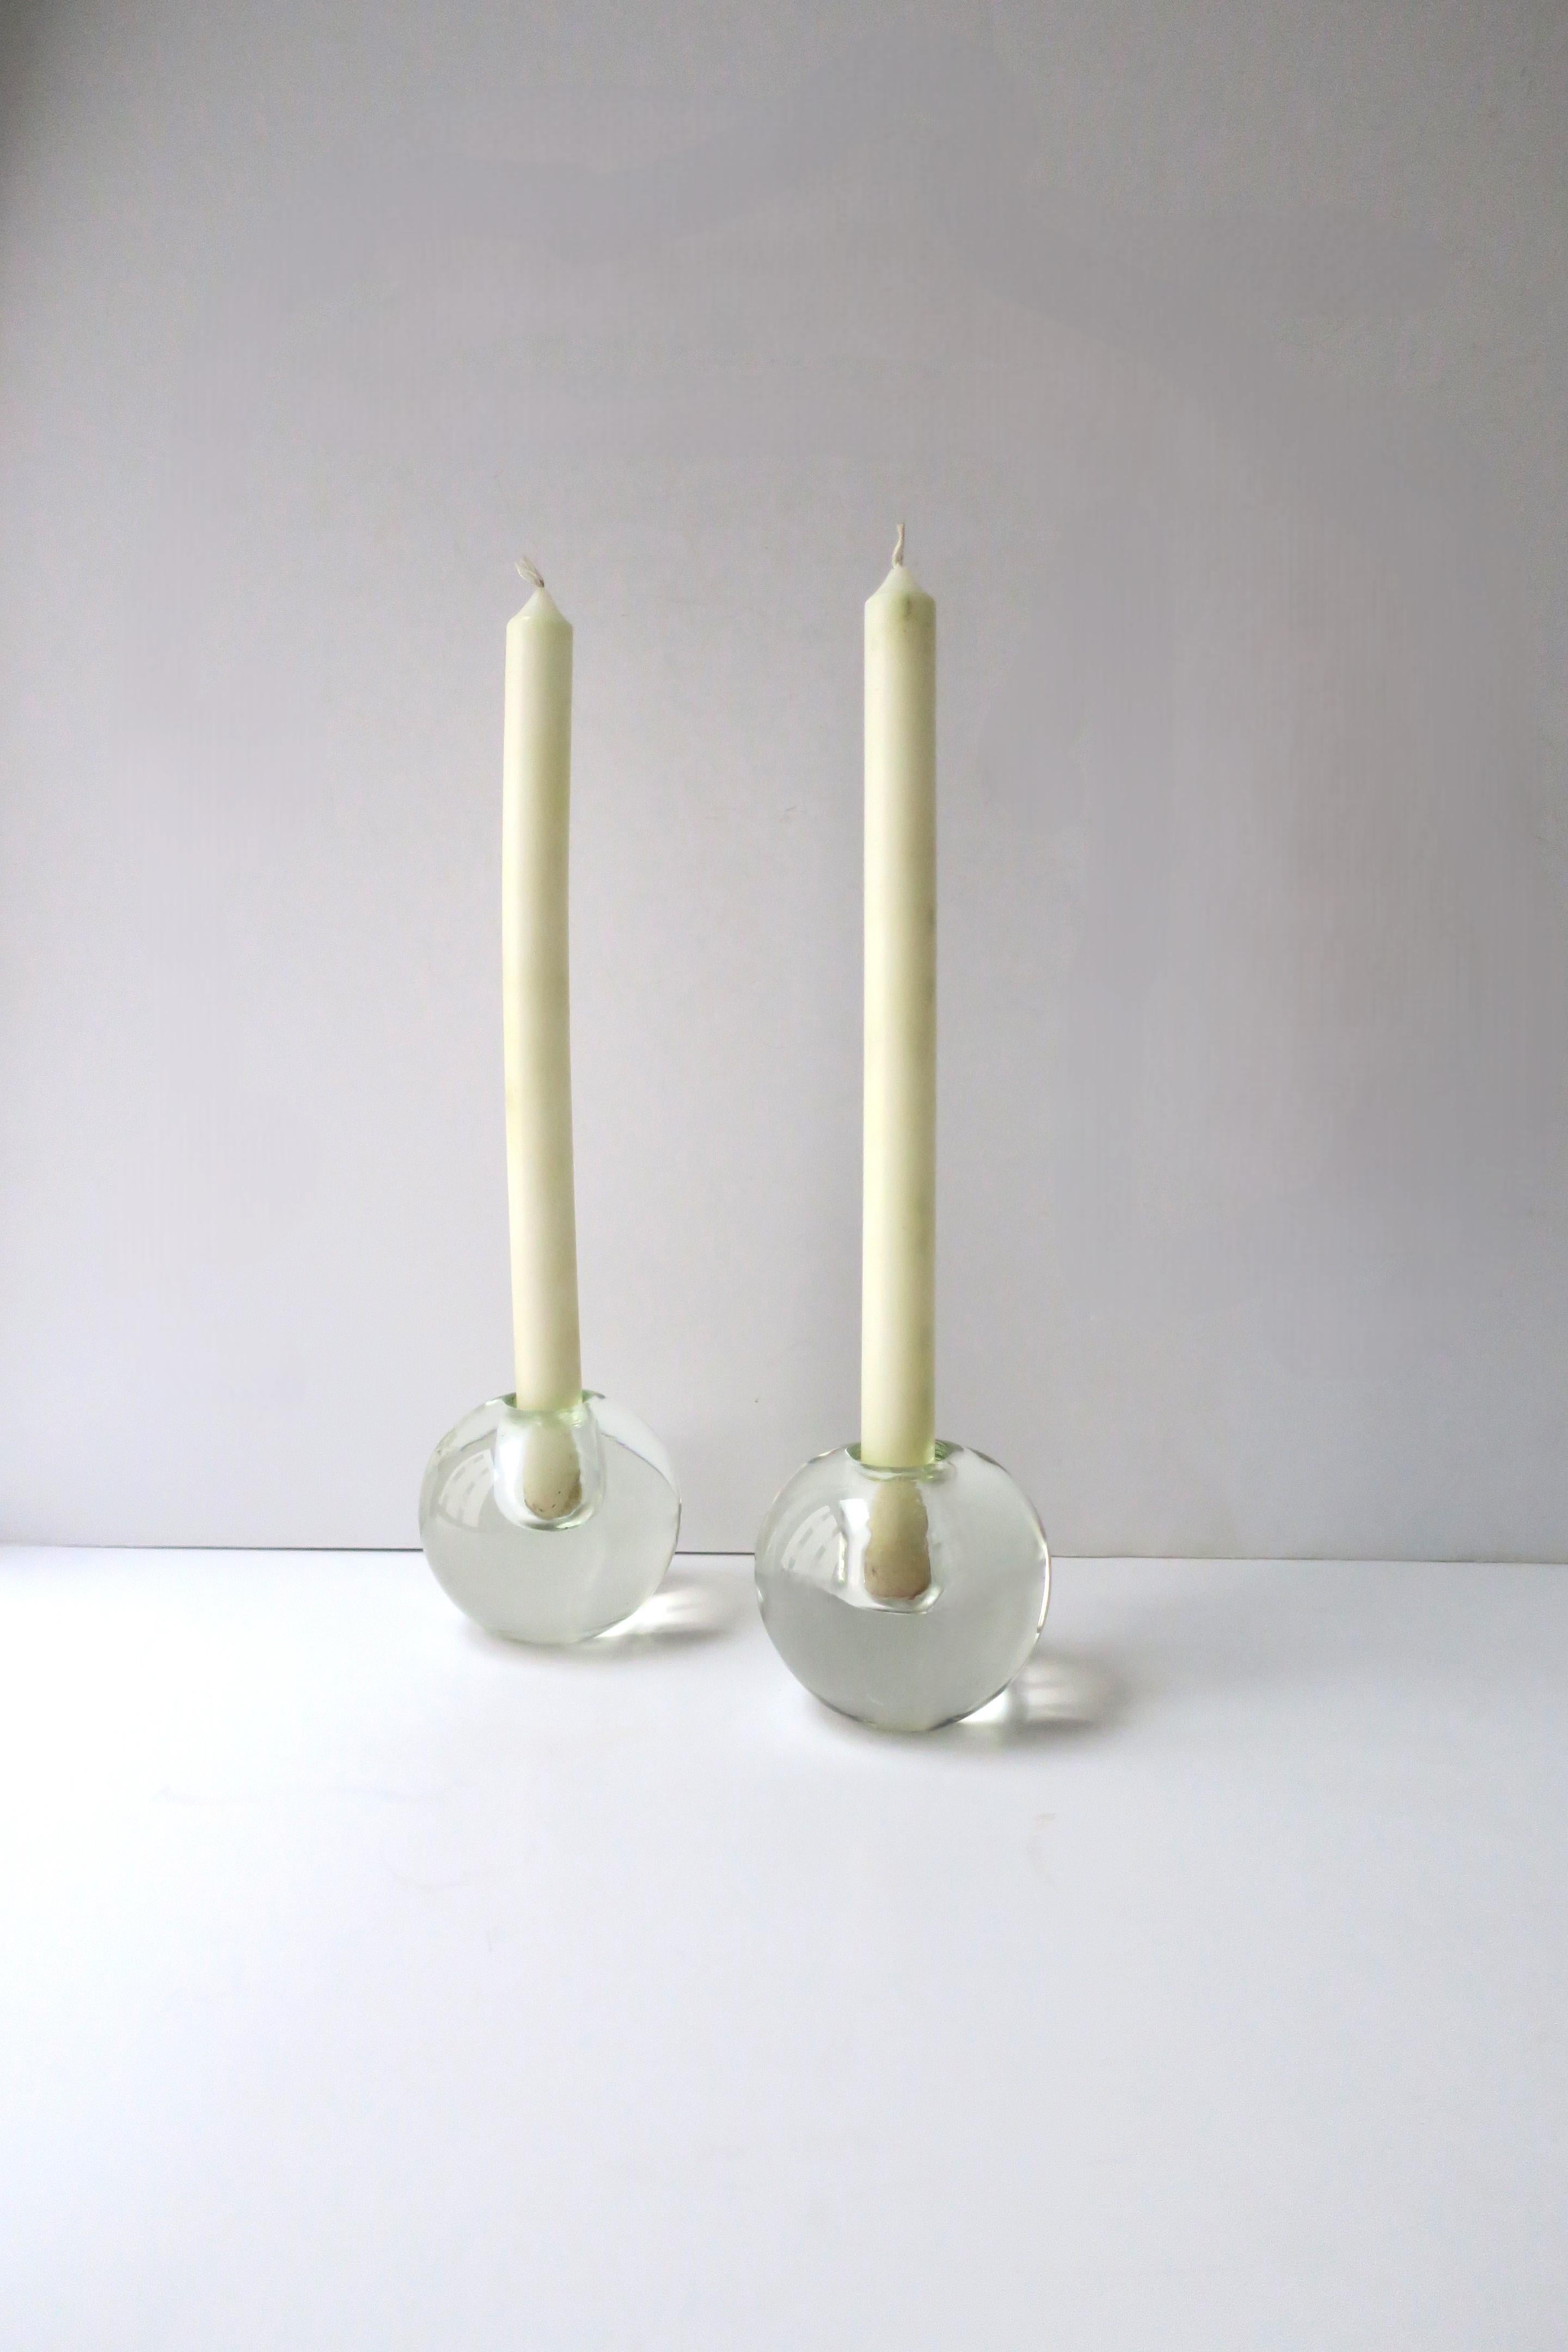 20th Century Modern Glass Sphere Candlesticks Holders, Pair For Sale